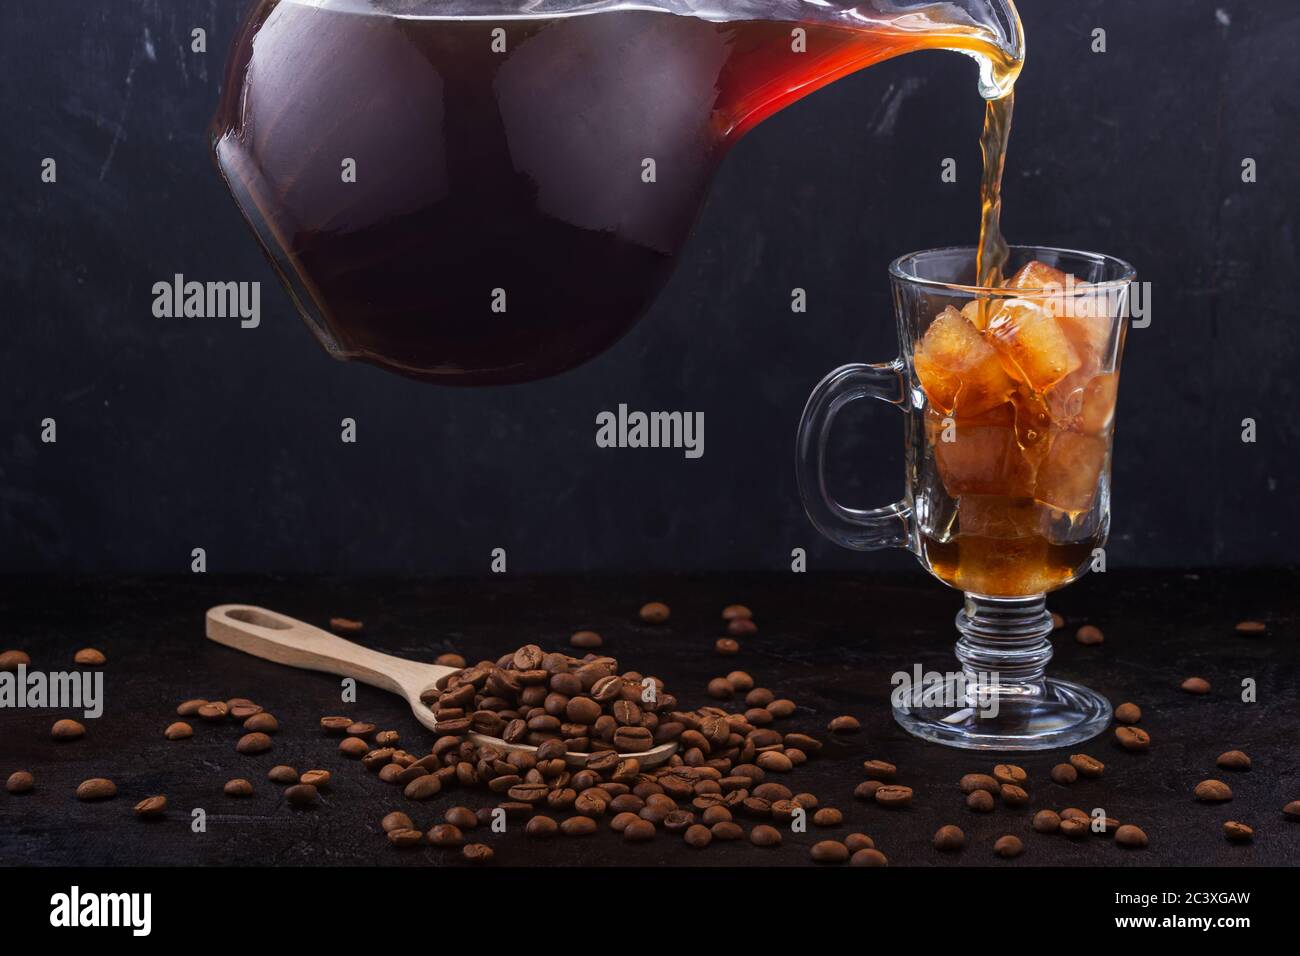 Cold coffee poured into a glass of ice with carafe Stock Photo